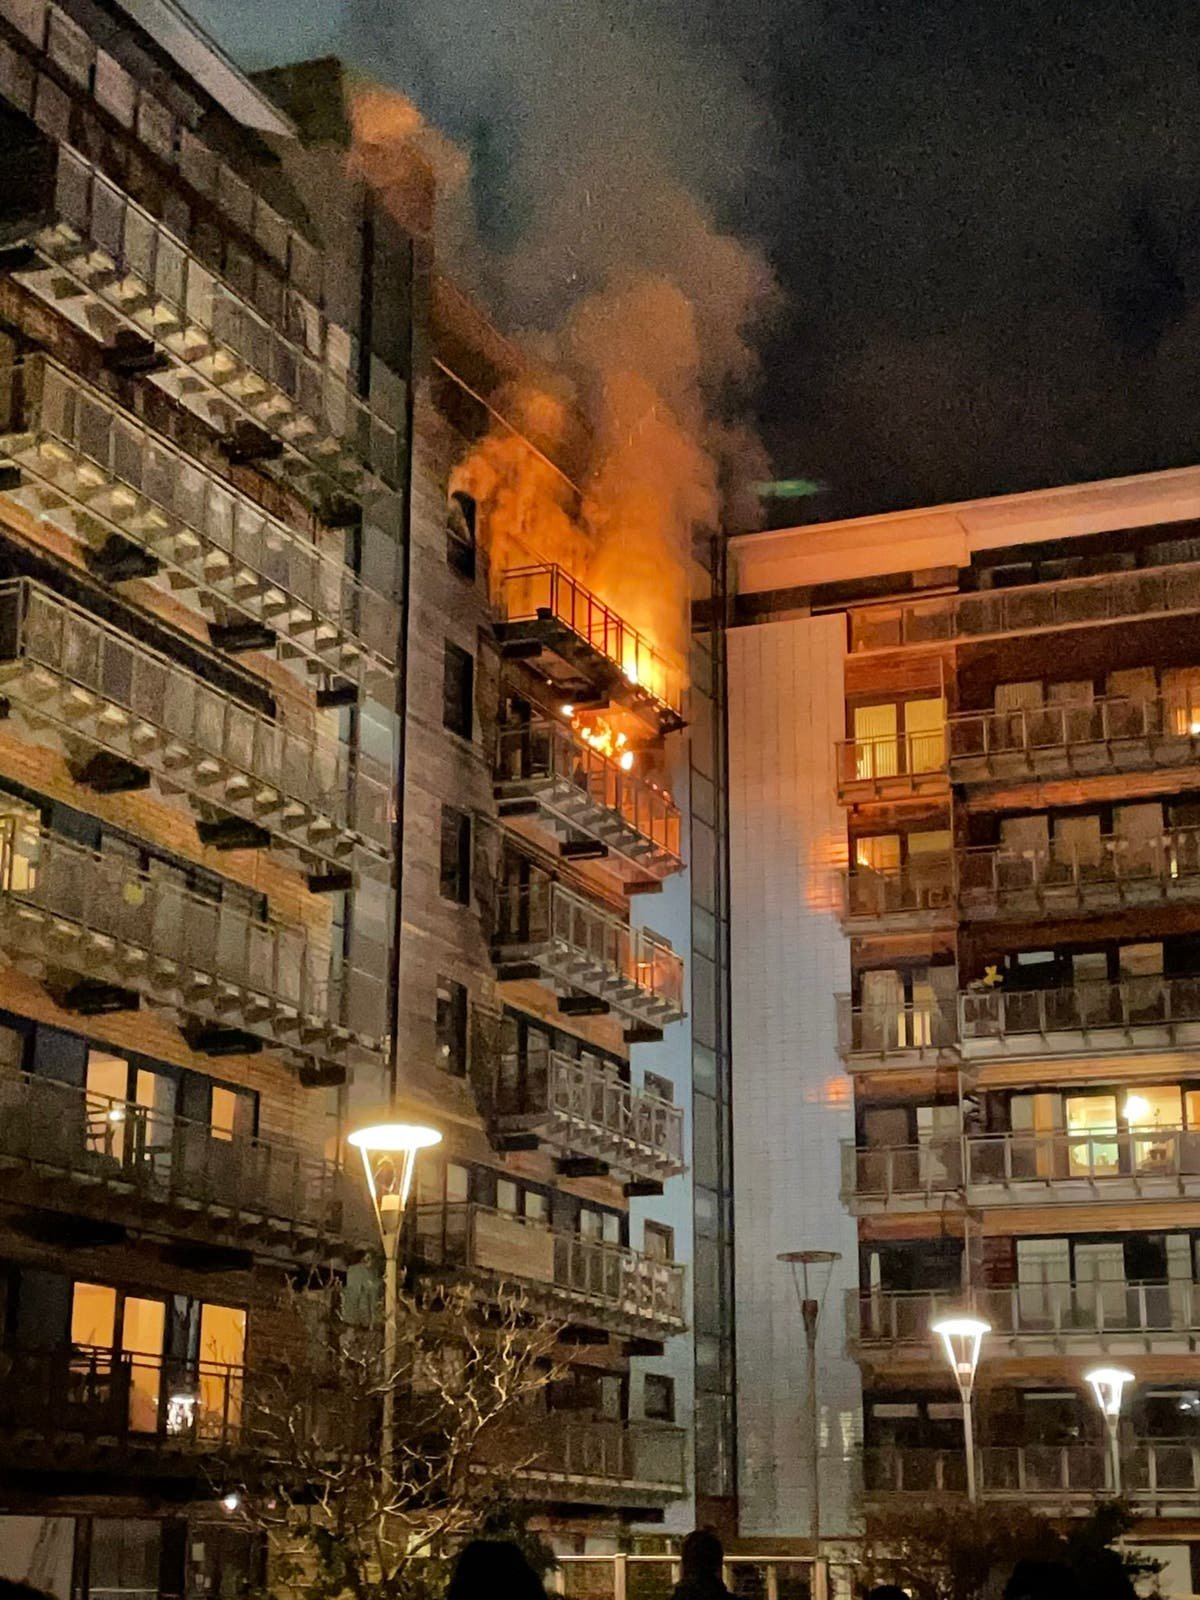 Edinburgh flat fire Firefighters injured as apartments evacuated in early morning blaze